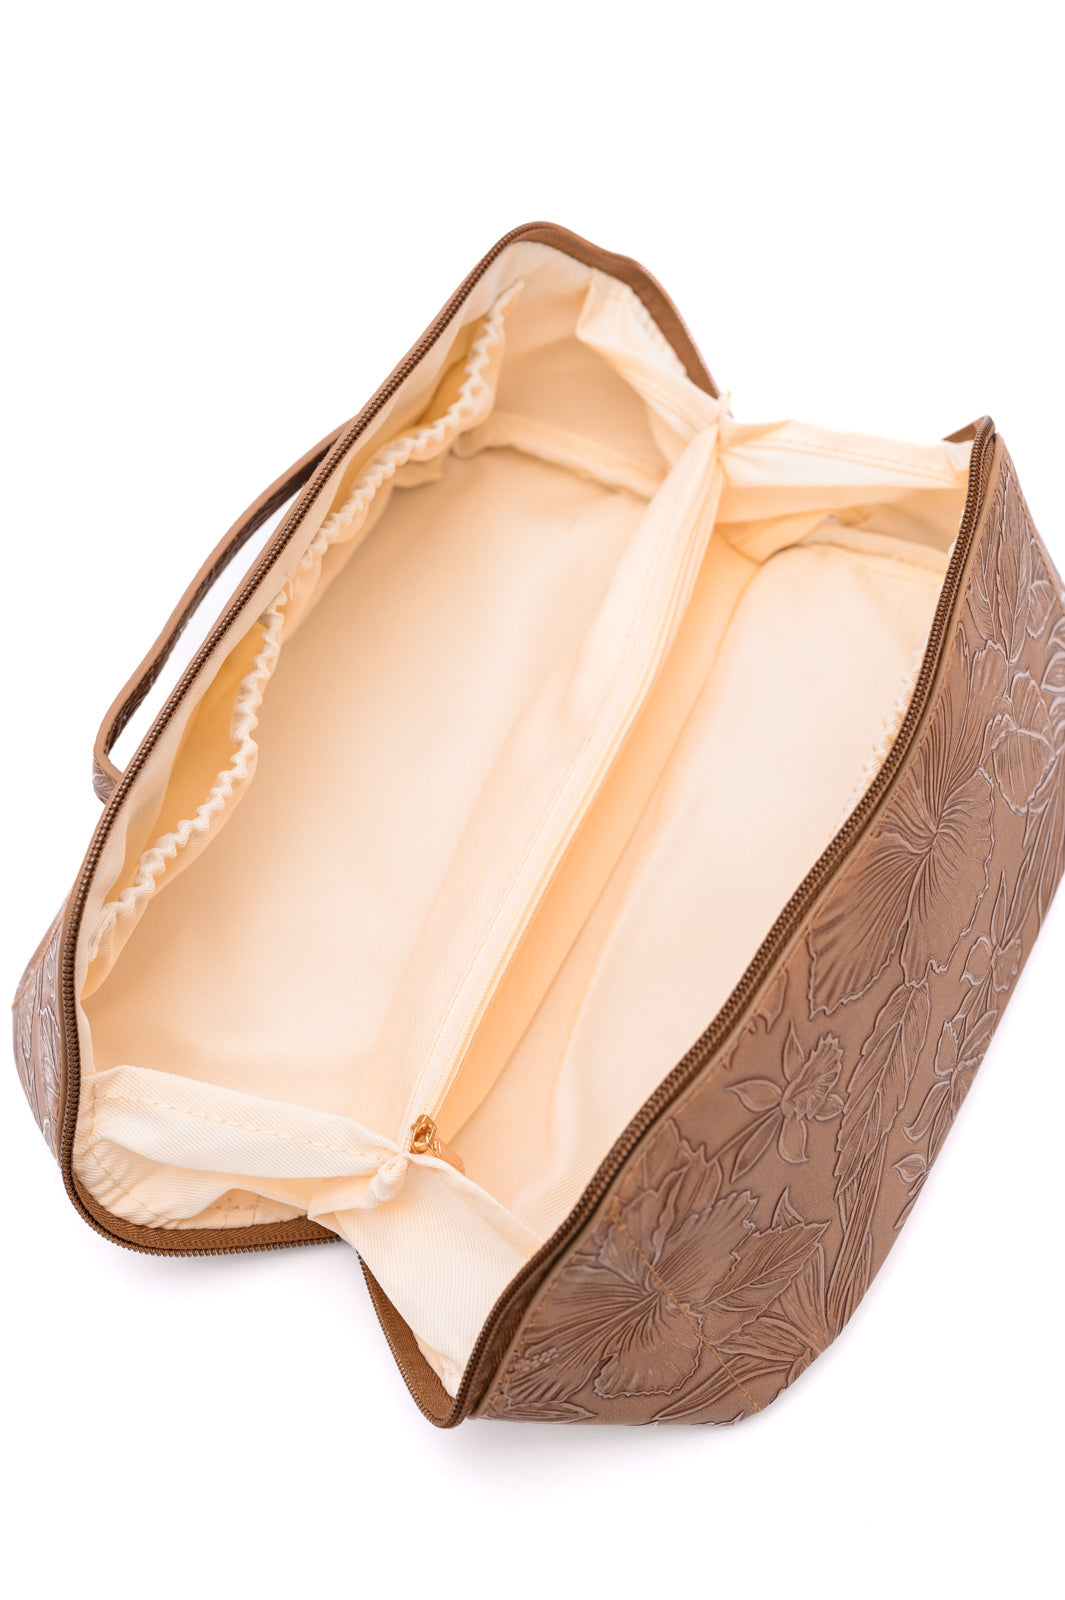 Life In Luxury Large Capacity Cosmetic Bag in Tan - FamFancy Boutique